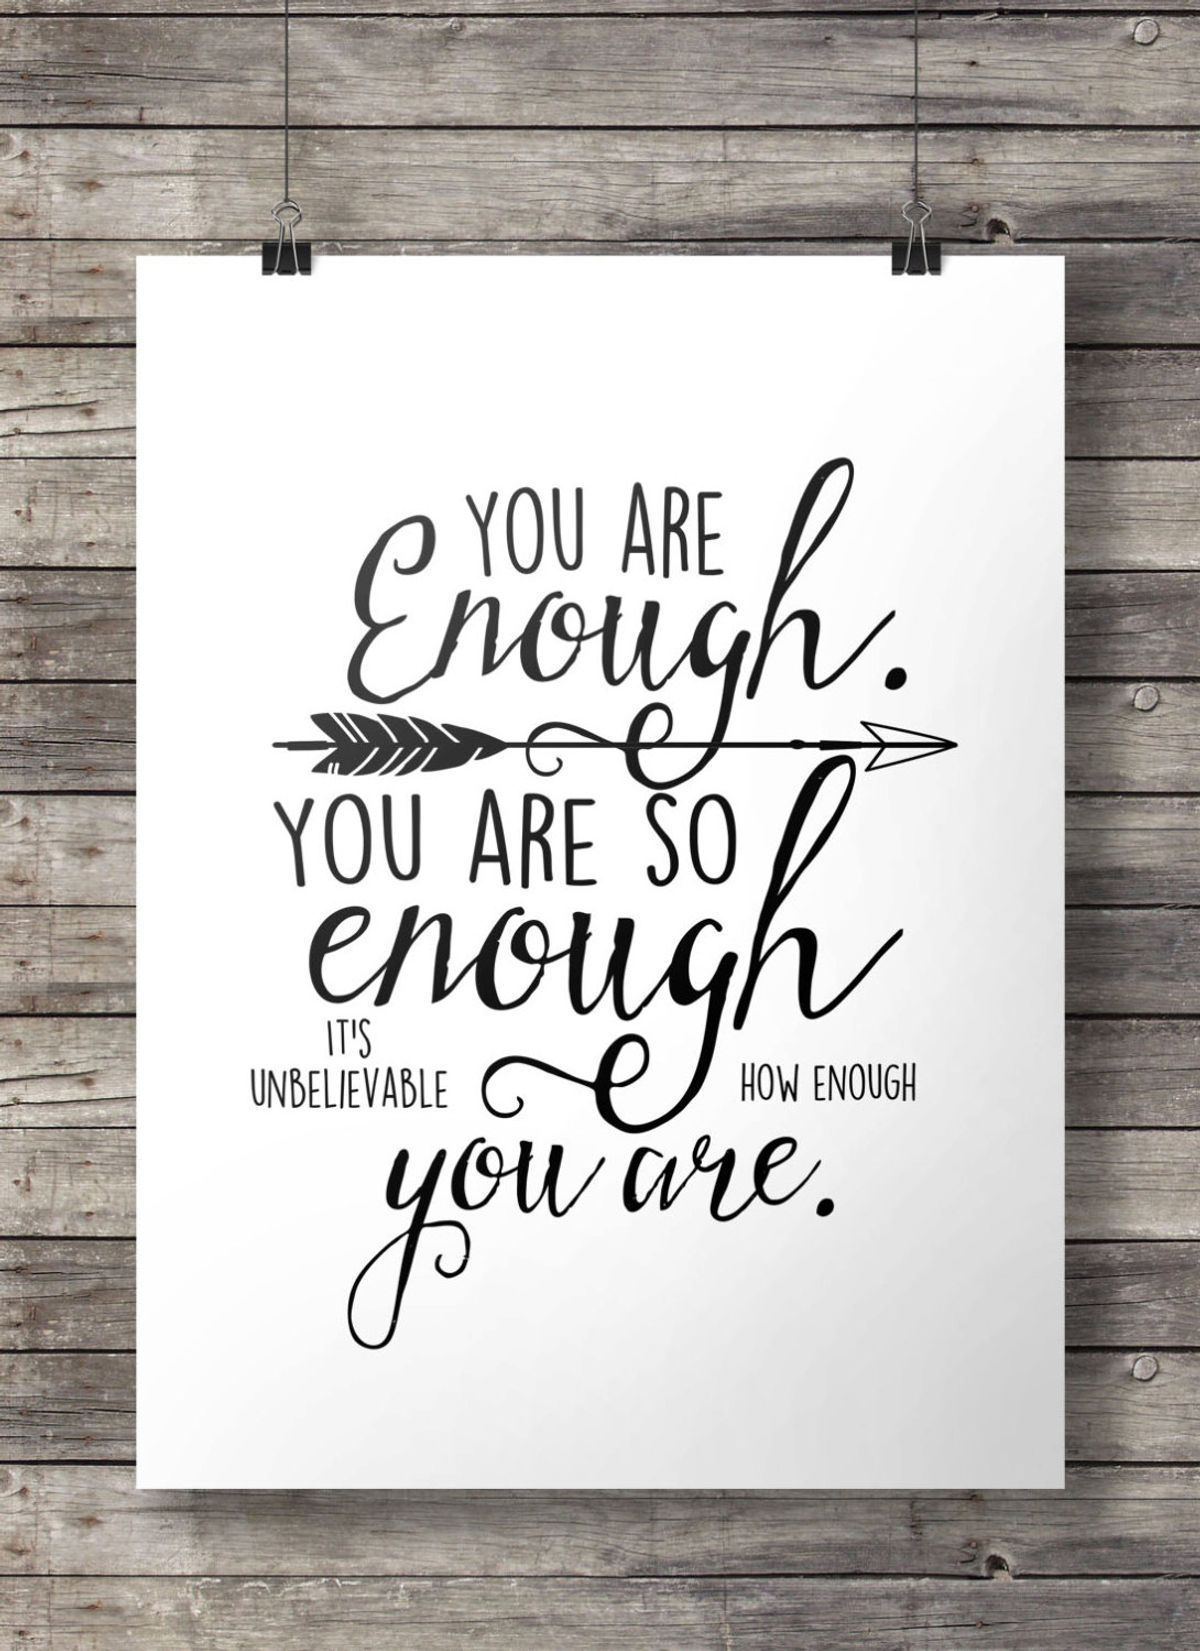 To Whom You Belong: You Are Enough